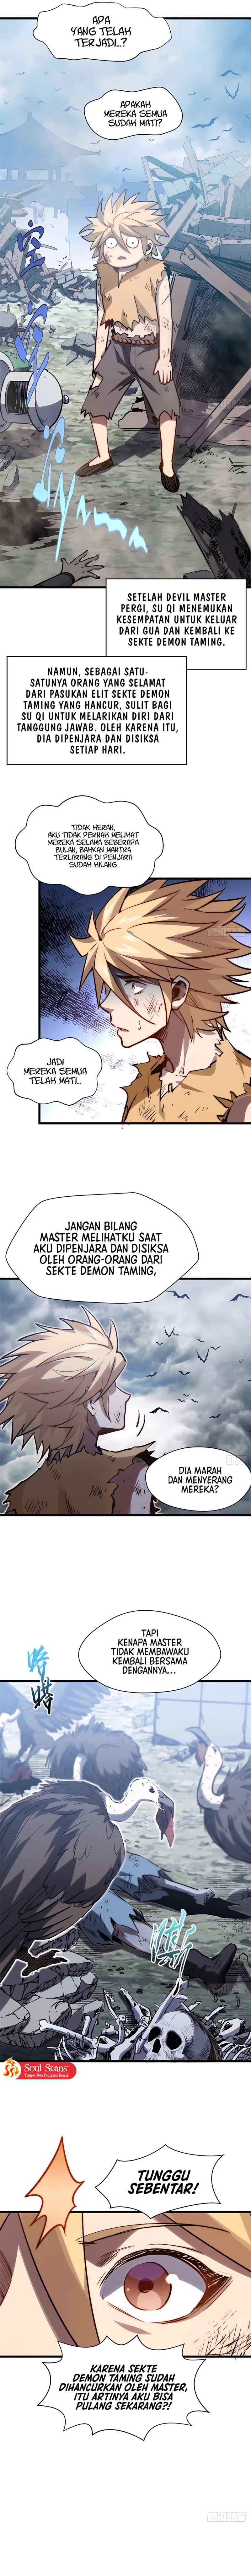 Dilarang COPAS - situs resmi www.mangacanblog.com - Komik top tier providence secretly cultivate for a thousand years 103 - chapter 103 104 Indonesia top tier providence secretly cultivate for a thousand years 103 - chapter 103 Terbaru 8|Baca Manga Komik Indonesia|Mangacan